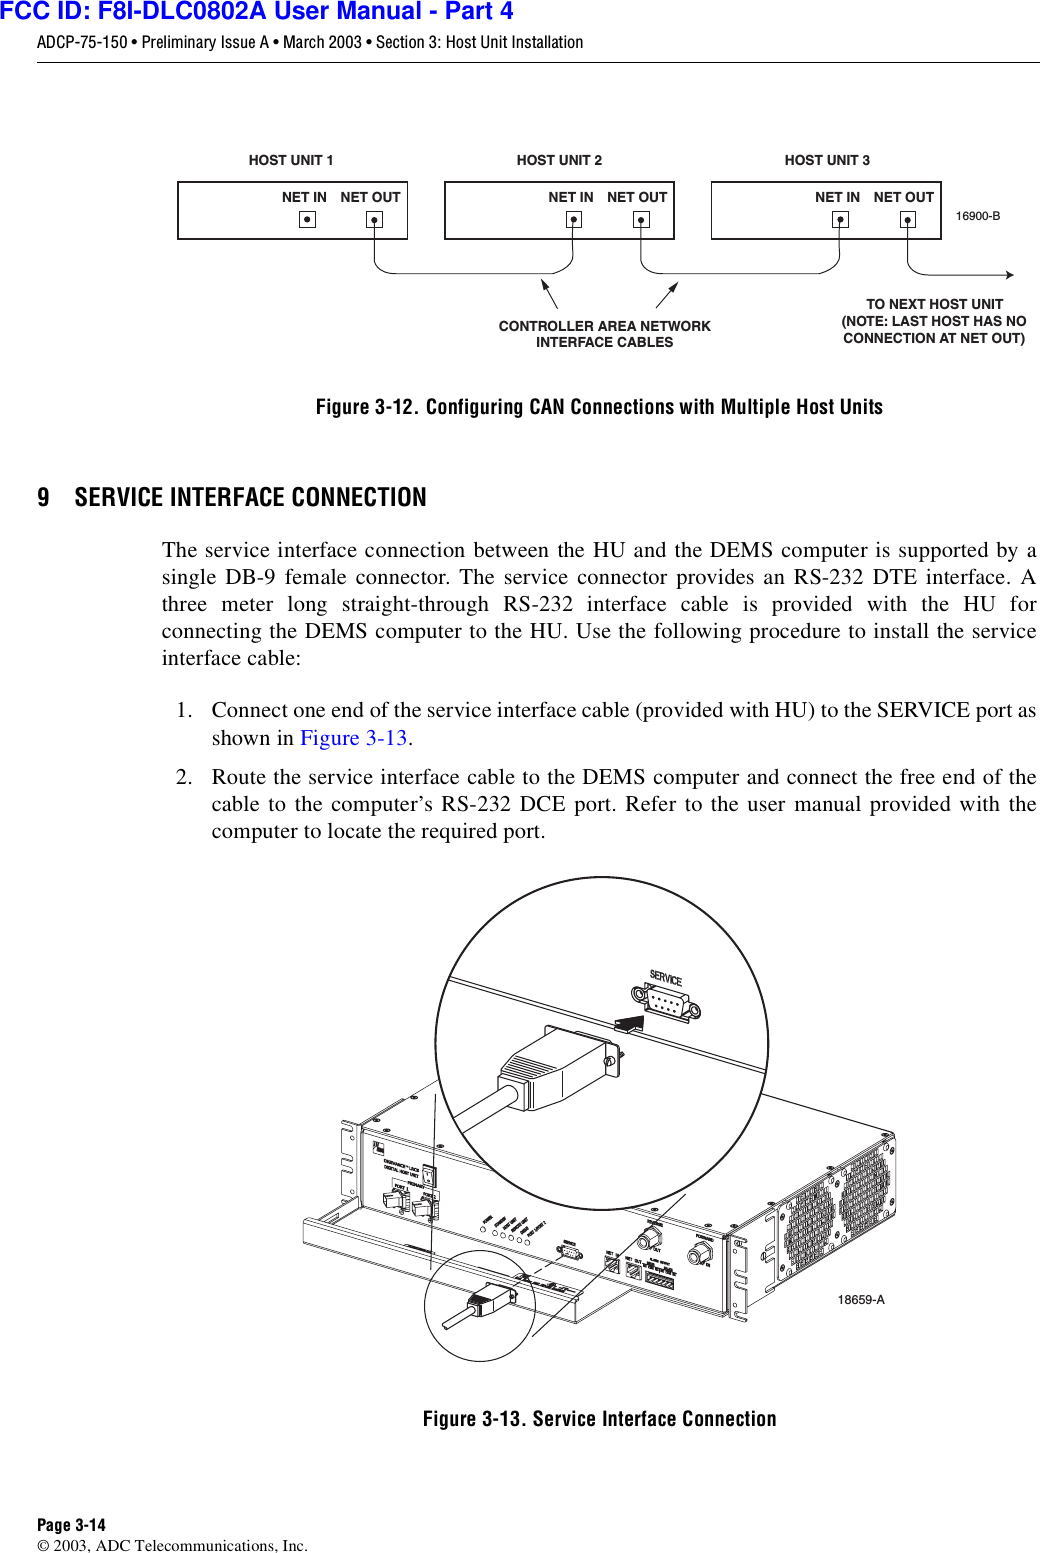 ADCP-75-150 • Preliminary Issue A • March 2003 • Section 3: Host Unit InstallationPage 3-14©2003, ADC Telecommunications, Inc.Figure 3-12. Configuring CAN Connections with Multiple Host Units9 SERVICE INTERFACE CONNECTIONThe service interface connection between the HU and the DEMS computer is supported by asingle DB-9 female connector. The service connector provides an RS-232 DTE interface. Athree meter long straight-through RS-232 interface cable is provided with the HU forconnecting the DEMS computer to the HU. Use the following procedure to install the serviceinterface cable:1. Connect one end of the service interface cable (provided with HU) to the SERVICE port asshown in Figure 3-13.2. Route the service interface cable to the DEMS computer and connect the free end of thecable to the computer’s RS-232 DCE port. Refer to the user manual provided with thecomputer to locate the required port.Figure 3-13. Service Interface ConnectionHOST UNIT 1 HOST UNIT 2 HOST UNIT 3NET IN NET OUT NET IN NET OUT NET IN NET OUT16900-BCONTROLLER AREA NETWORKINTERFACE CABLESTO NEXT HOST UNIT(NOTE: LAST HOST HAS NOCONNECTION AT NET OUT)18659-AFCC ID: F8I-DLC0802A User Manual - Part 4